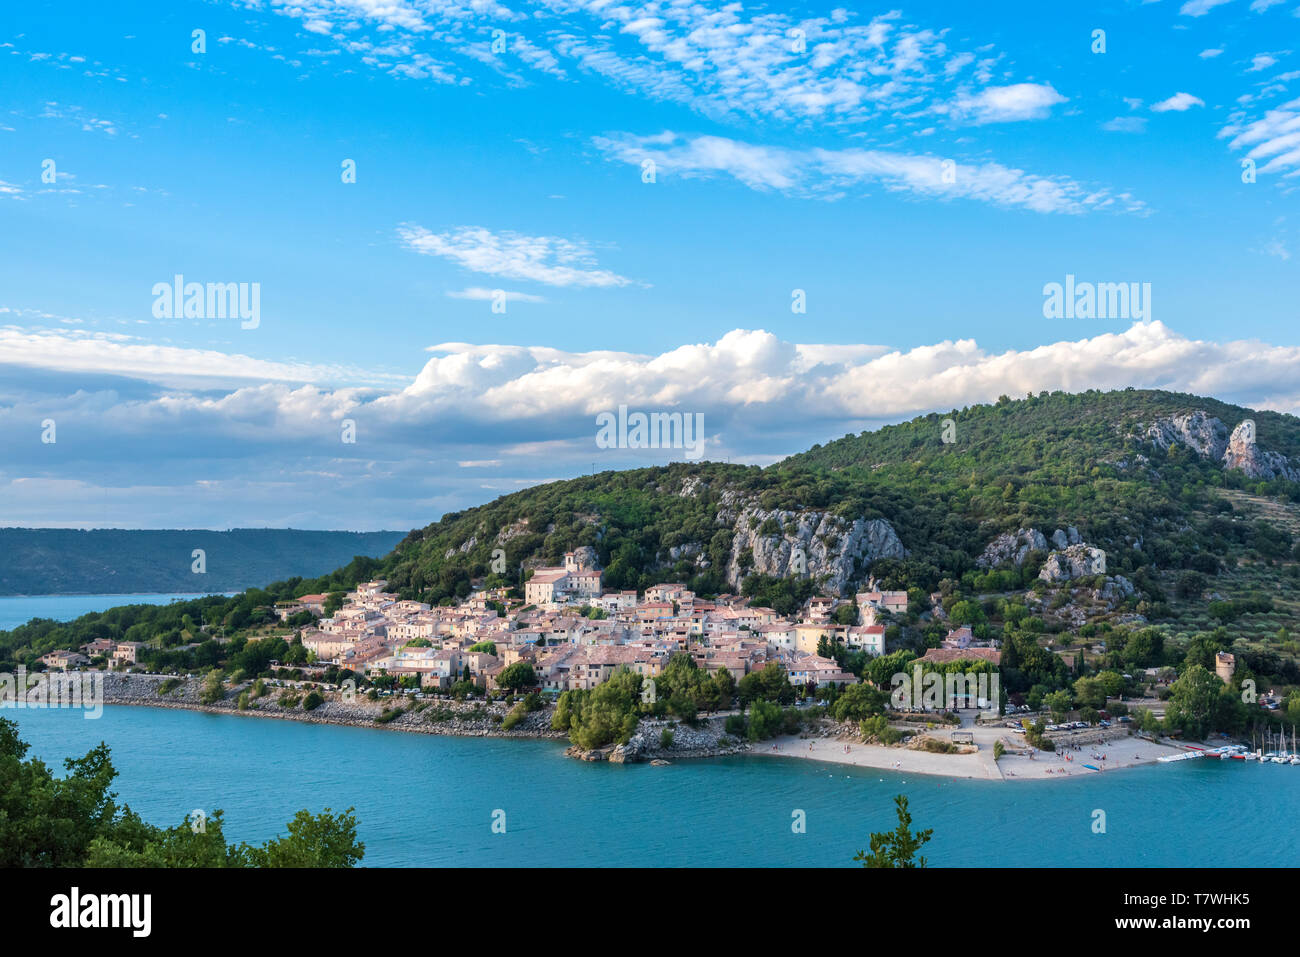 Village of Bauduen in the south of France Stock Photo